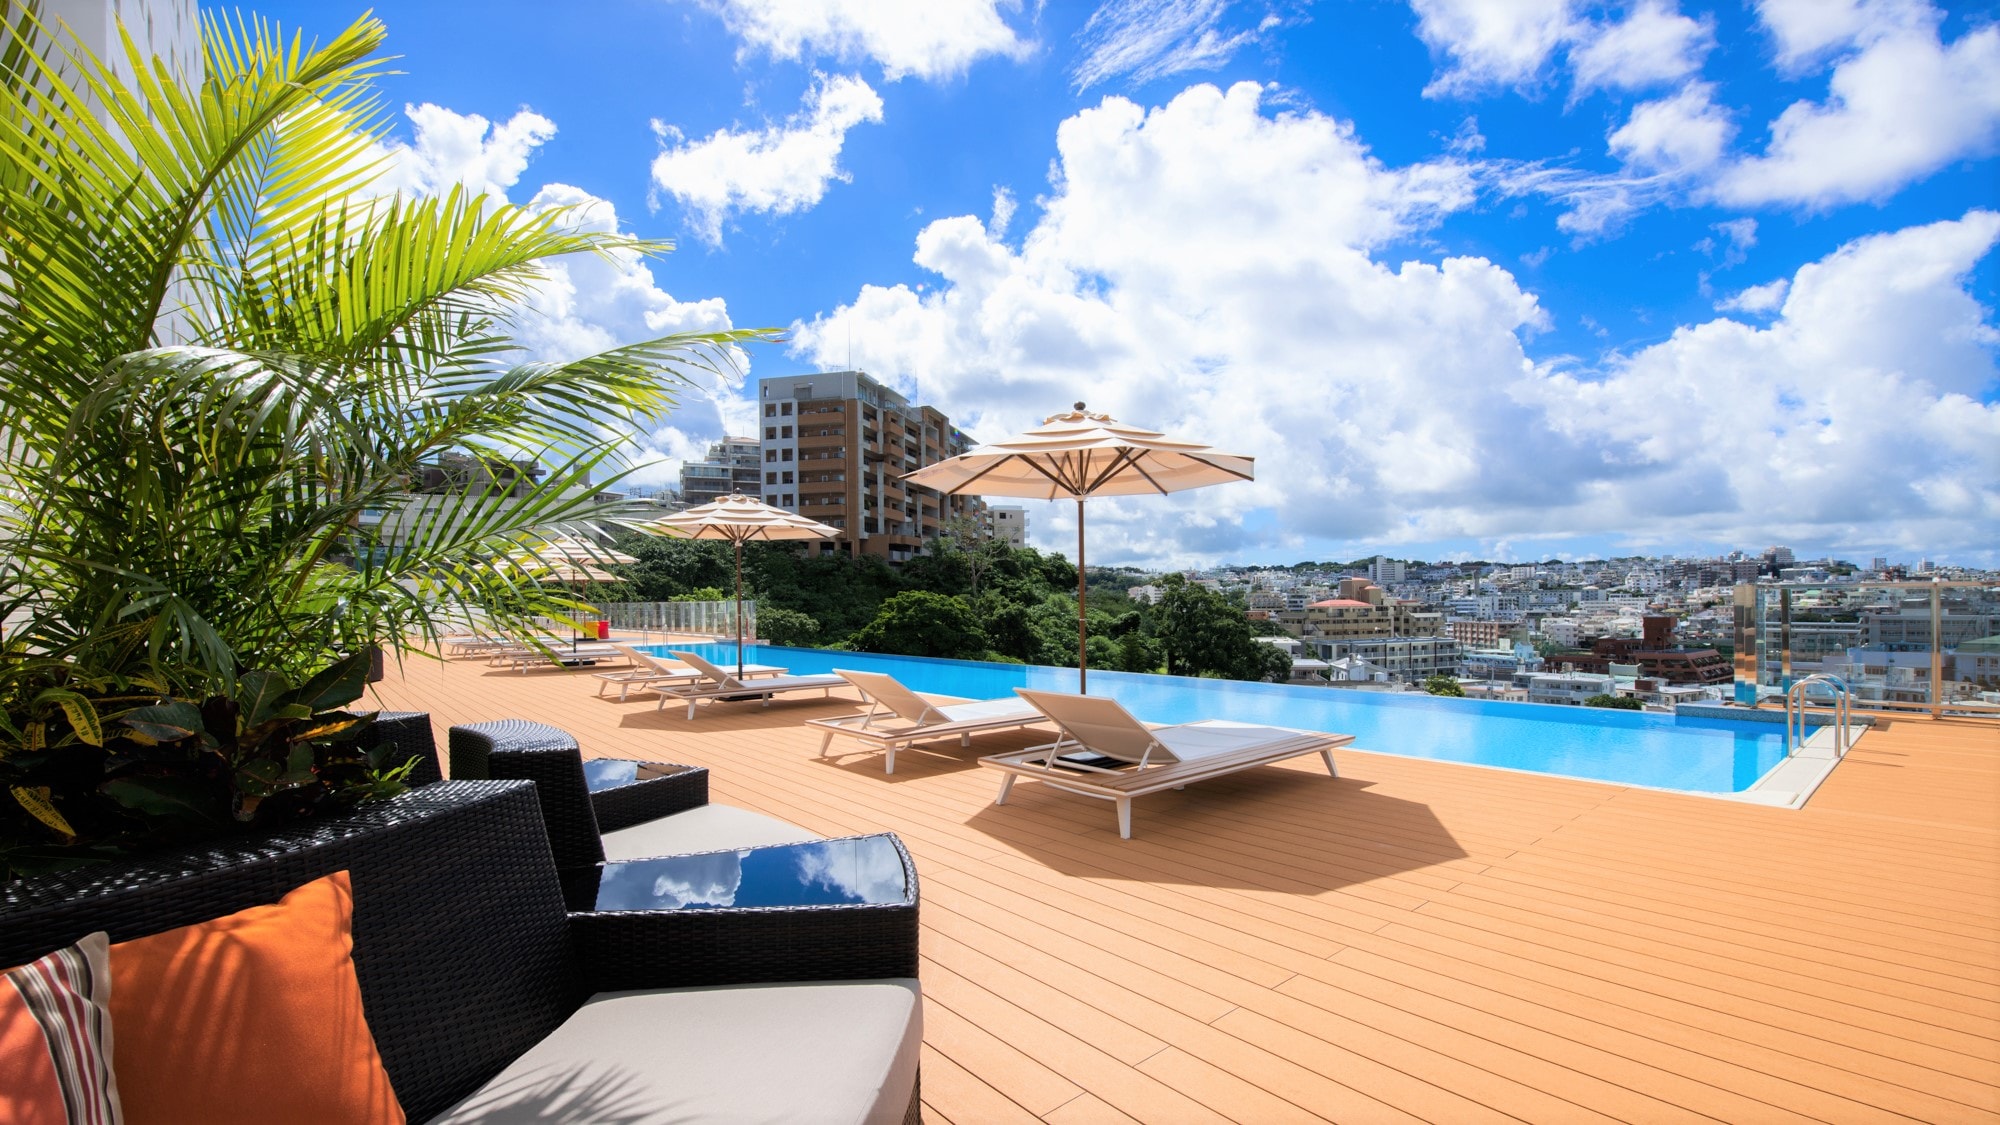 [Infinity Pool] The scenery that changes over time allows you to enjoy the feeling of a resort even in Naha.